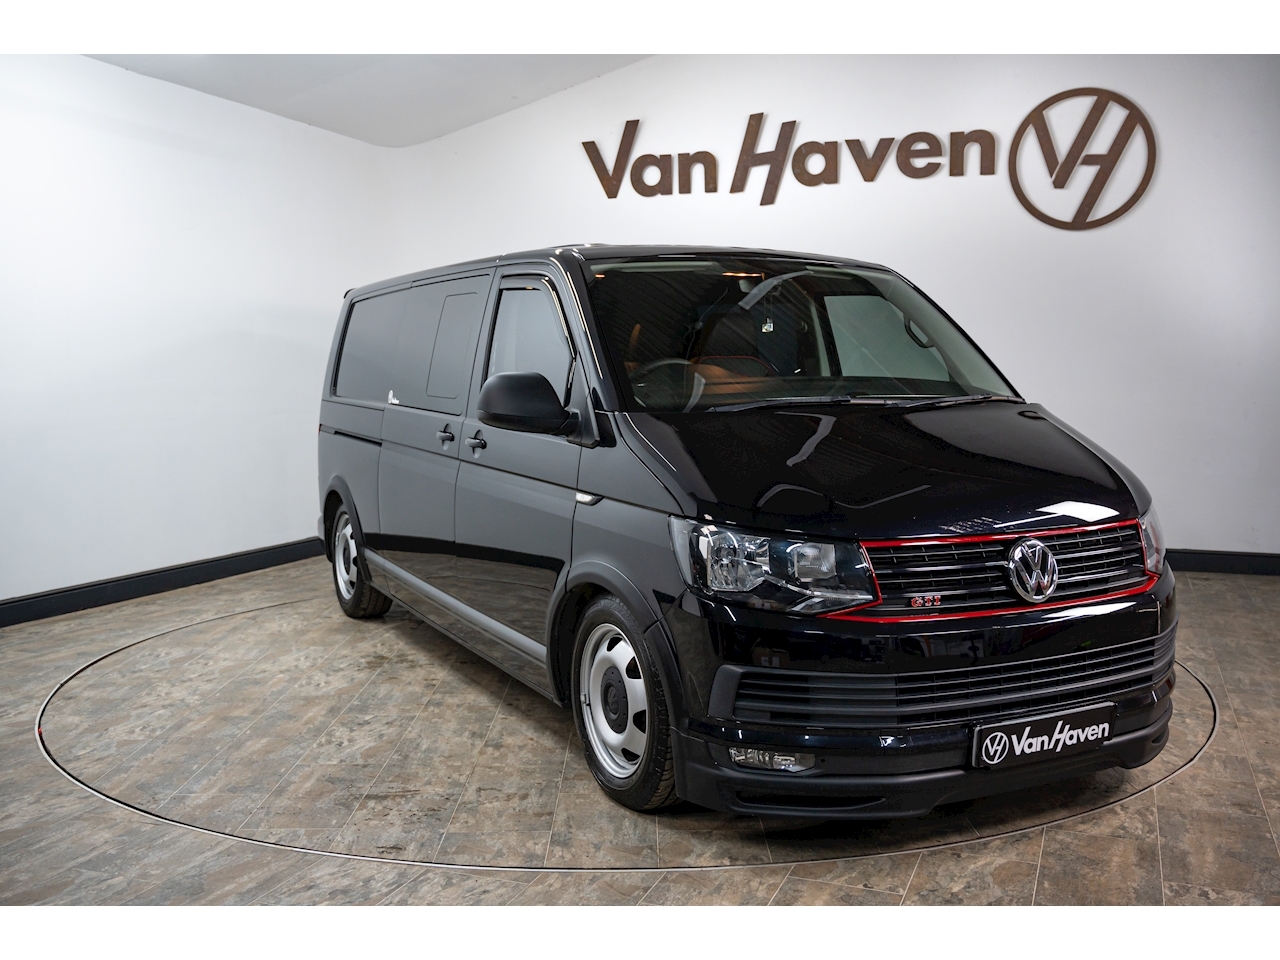 Used 2015 Volkswagen VW GTI lmited edition 001/050 (pre launch) For in Dorset VAN HAVEN LIMITED